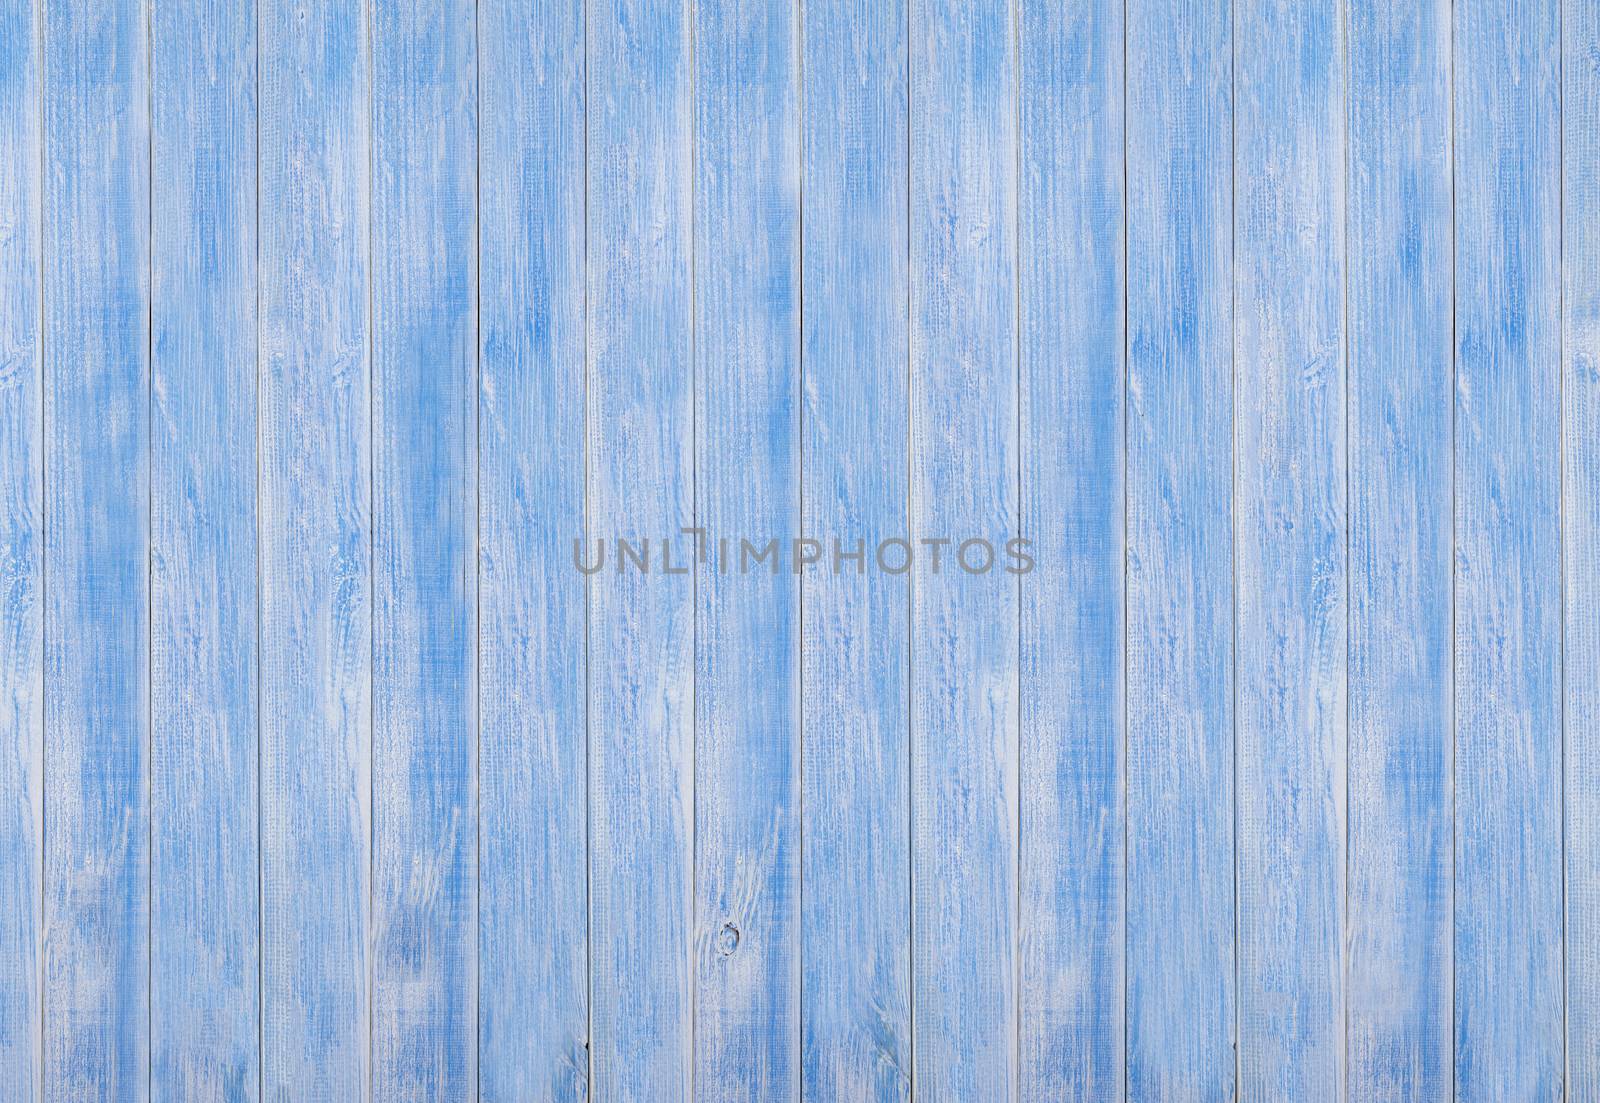 Pale blue wood plank surface texture, wooden board copy space